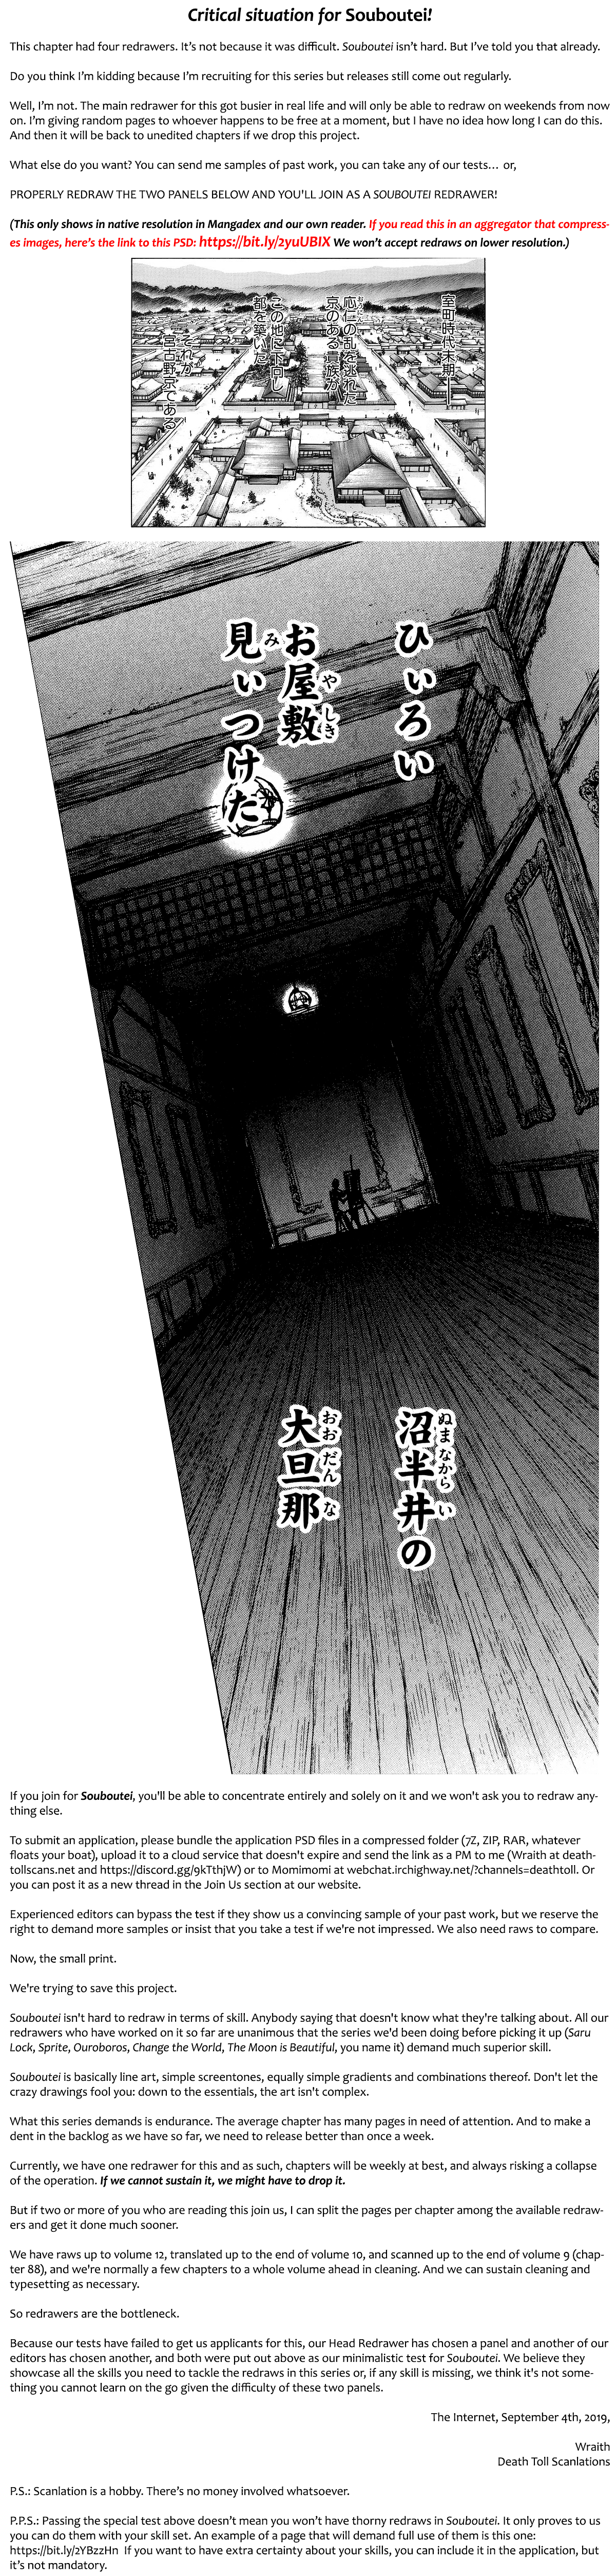 Souboutei Must Be Destroyed Vol.8 Chapter 78: Invader Sighted - Picture 1